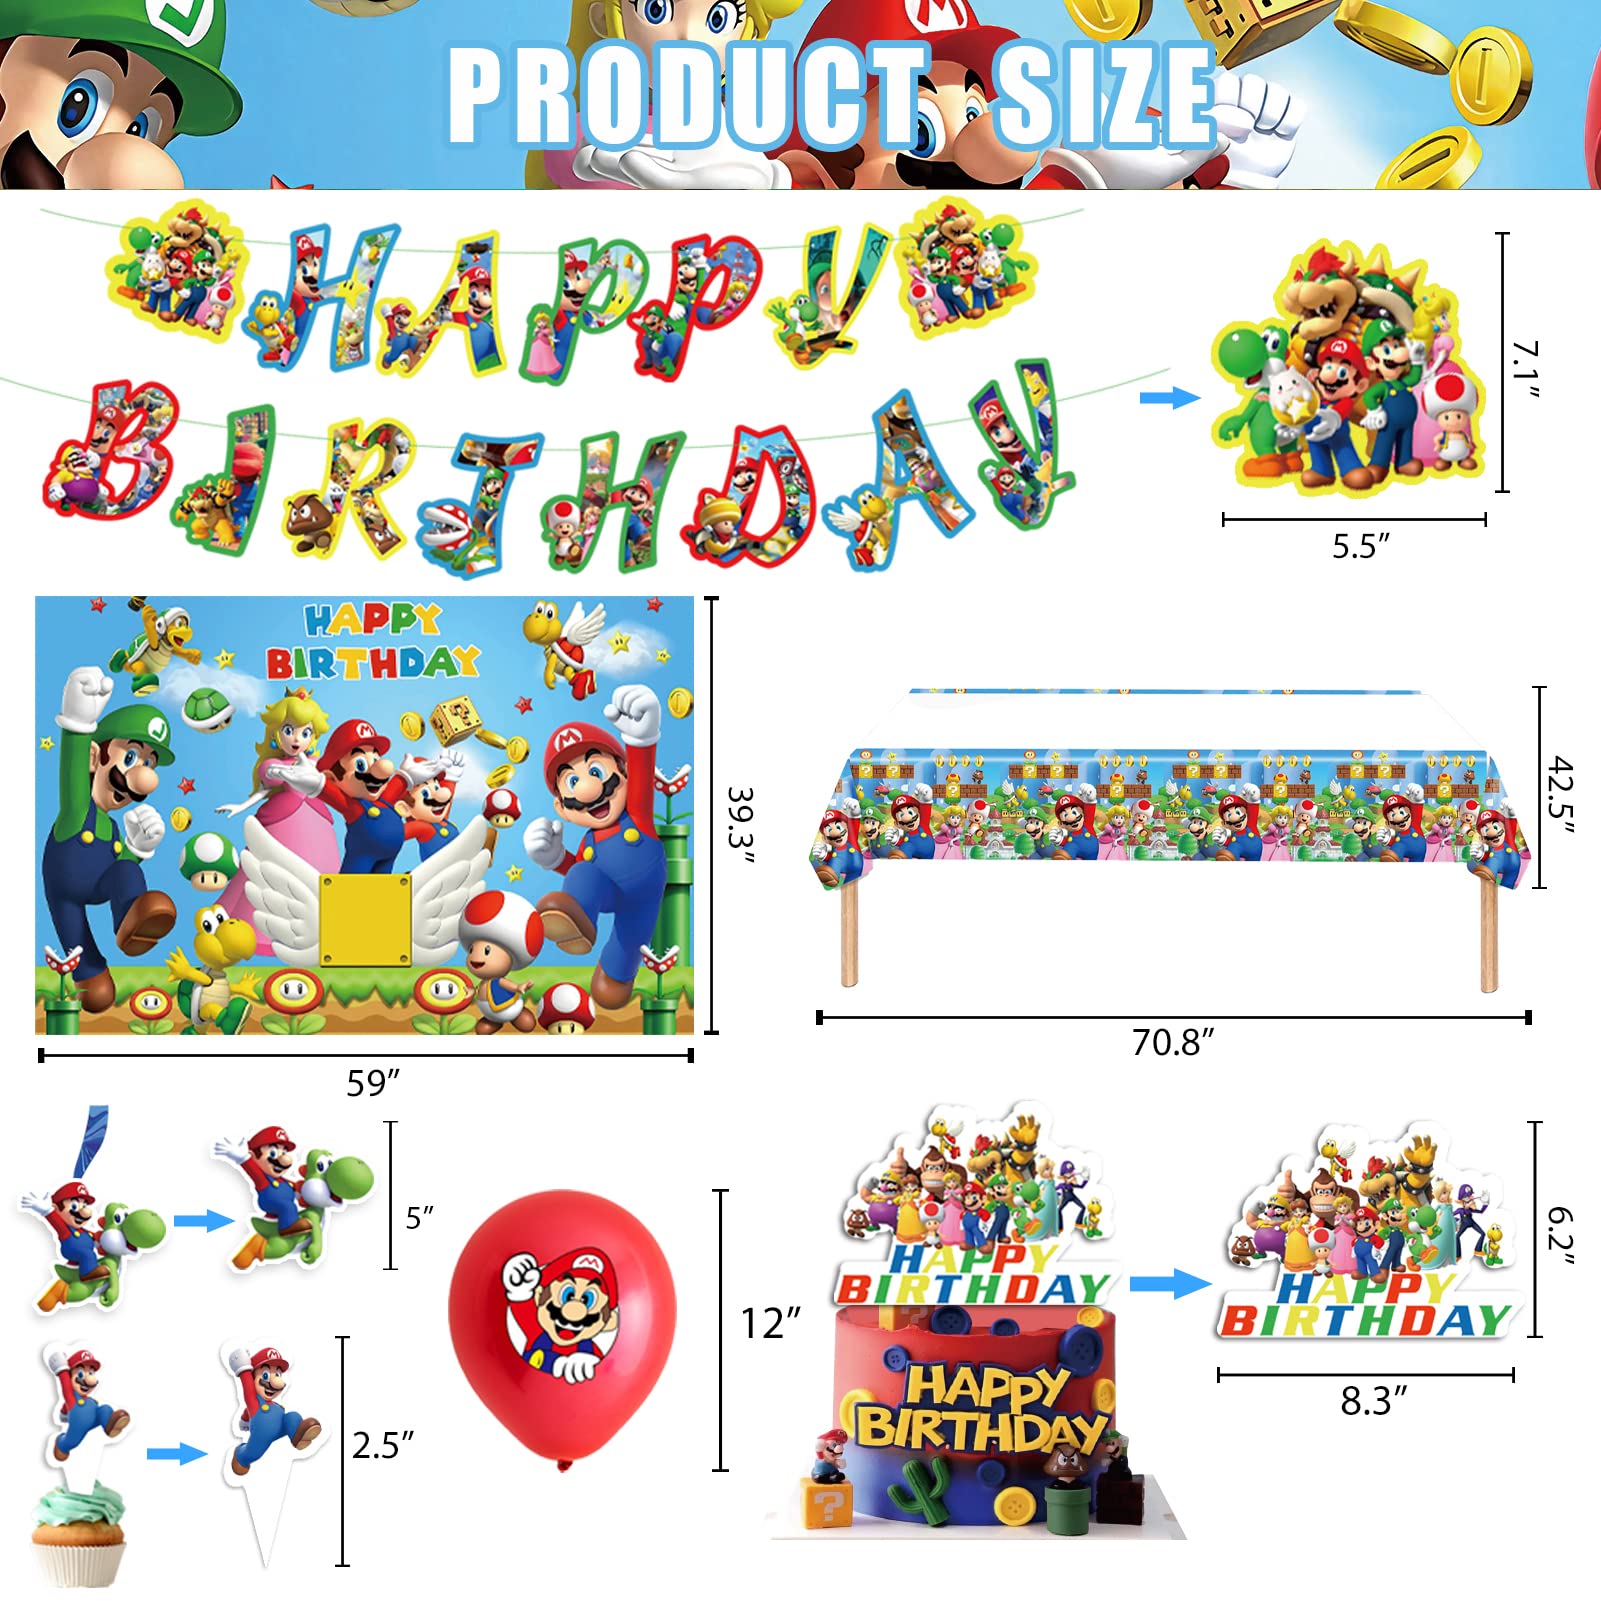 Mario Birthday Party Supplies Birthday Decorations Party Decorations Include Backdrop, Tablecloth, Birthday Banners, Cake Decoration, 24 Cupcake Toppers, 16 Latex Balloons, 6 Hanging Swirls